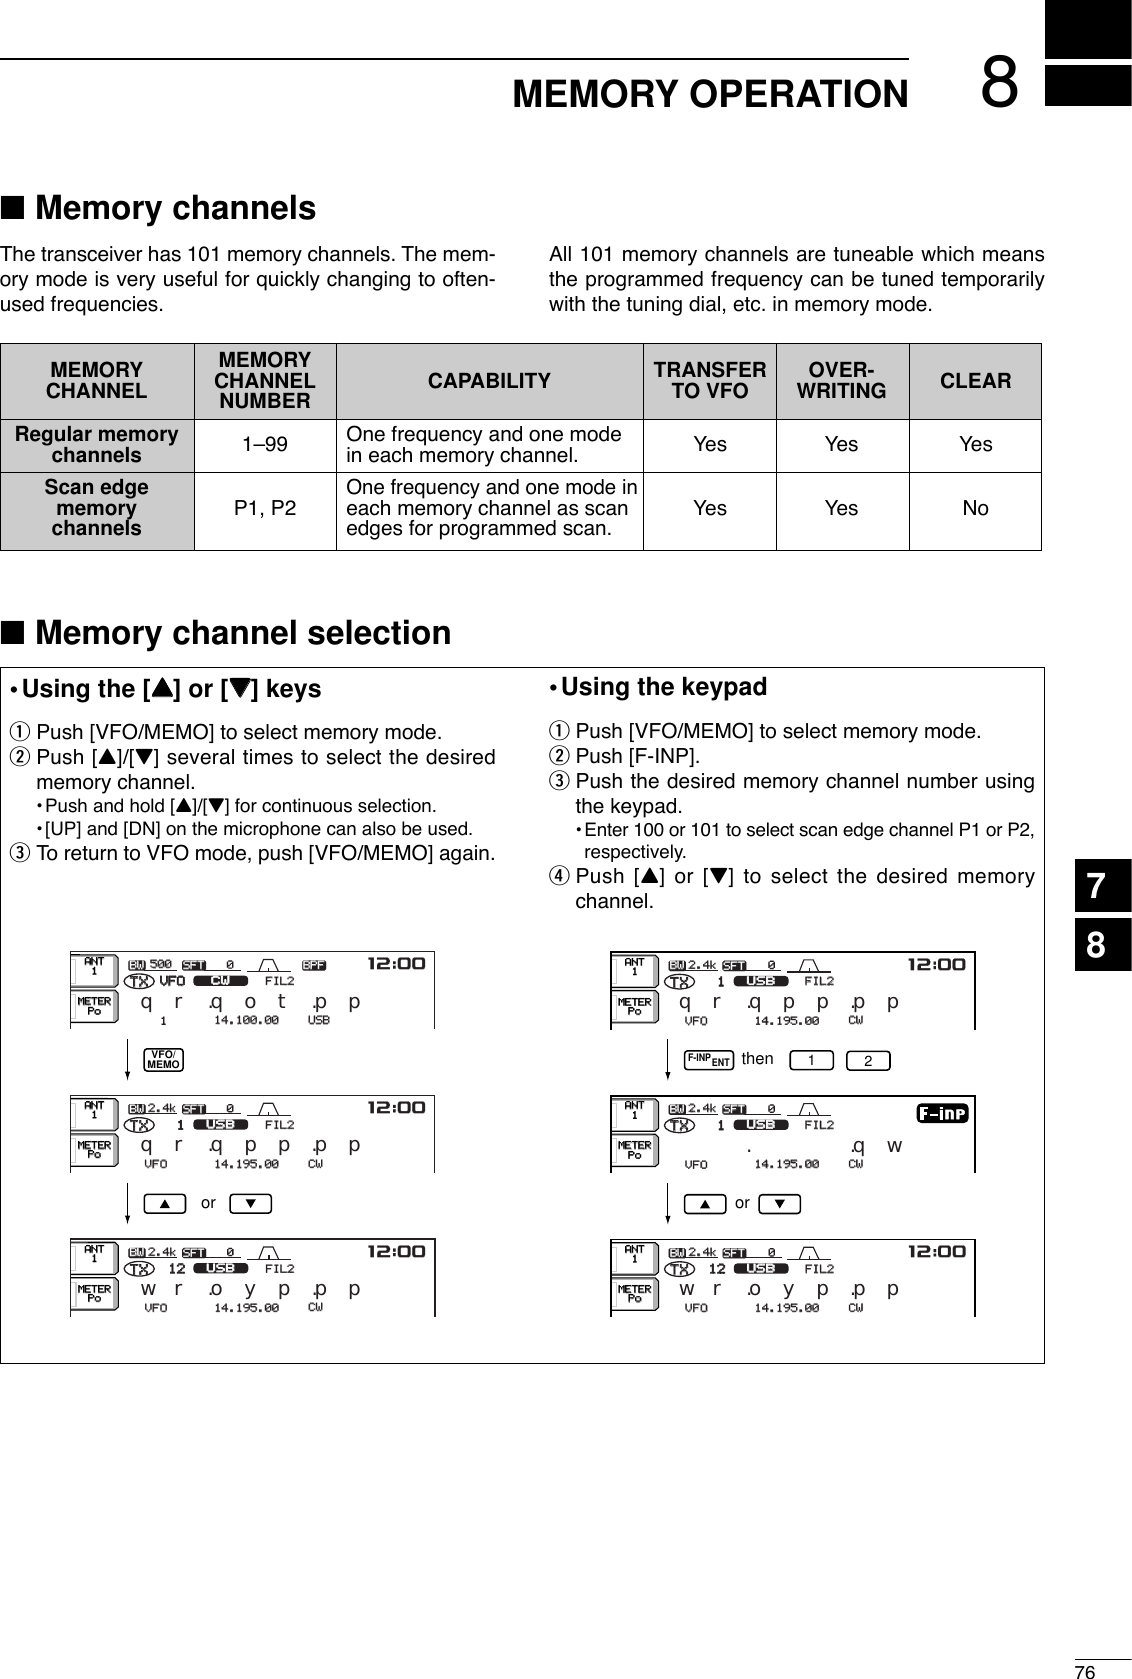 876MEMORY OPERATION78■Memory channelsThe transceiver has 101 memory channels. The mem-ory mode is very useful for quickly changing to often-used frequencies.All 101 memory channels are tuneable which meansthe programmed frequency can be tuned temporarilywith the tuning dial, etc. in memory mode.■Memory channel selection•Using the [YY] or [ZZ] keysqPush [VFO/MEMO] to select memory mode.wPush [Y]/[Z] several times to select the desiredmemory channel.•Push and hold [Y]/[Z] for continuous selection.•[UP] and [DN] on the microphone can also be used.eTo return to VFO mode, push [VFO/MEMO] again.•Using the keypadqPush [VFO/MEMO] to select memory mode.wPush [F-INP].ePush the desired memory channel number usingthe keypad.•Enter 100 or 101 to select scan edge channel P1 or P2,respectively.rPush [Y] or [Z] to select the desired memorychannel.SFTSFT 0FIL2FIL2CWCWqw:ppTXTXUSBUSBqr.qot.pp14.100.0014.100.00BPFBPF1VFOVFOBWBW 500 500 SFTSFT 0FIL2FIL2USBUSBqw:ppTXTXCWCWqr.qpp.pp14.195.0014.195.00VFOVFO1BWBW 2.4k2.4kSFTSFT 0FIL2FIL2USBUSBqw:ppTXTXwr.oyp.pp1212BWBW 2.4k2.4kCWCW14.195.0014.195.00VFOVFOANTANT1METERMETERPoPoANTANT1METERMETERPoPoANTANT1METERMETERPoPoVFO/MEMOorF-INPENTSFTSFT 0FIL2FIL2USBUSBqw:ppTXTXCWCWqr.qpp.pp14.195.0014.195.00VFOVFO1BWBW 2.4k2.4kSFTSFT 0FIL2FIL2USBUSBTXTXCWCW.qpp.qw14.195.0014.195.00VFOVFO1BWBW 2.4k2.4kSFTSFT 0FIL2FIL2USBUSBqw:ppTXTXwr.oyp.pp1212BWBW 2.4k2.4kCWCW14.195.0014.195.00VFOVFOANTANT1METERMETERPoPoANTANT1METERMETERPoPoANTANT1METERMETERPoPo12orthenMEMORY MEMORY TRANSFER OVER-CHANNEL CHANNEL CAPABILITY TO VFO WRITING CLEARNUMBERRegular memory 1–99 One frequency and one mode  Yes Yes Yeschannels in each memory channel.Scan edgeOne frequency and one mode inmemory P1, P2 each memory channel as scan Yes Yes Nochannels edges for programmed scan.